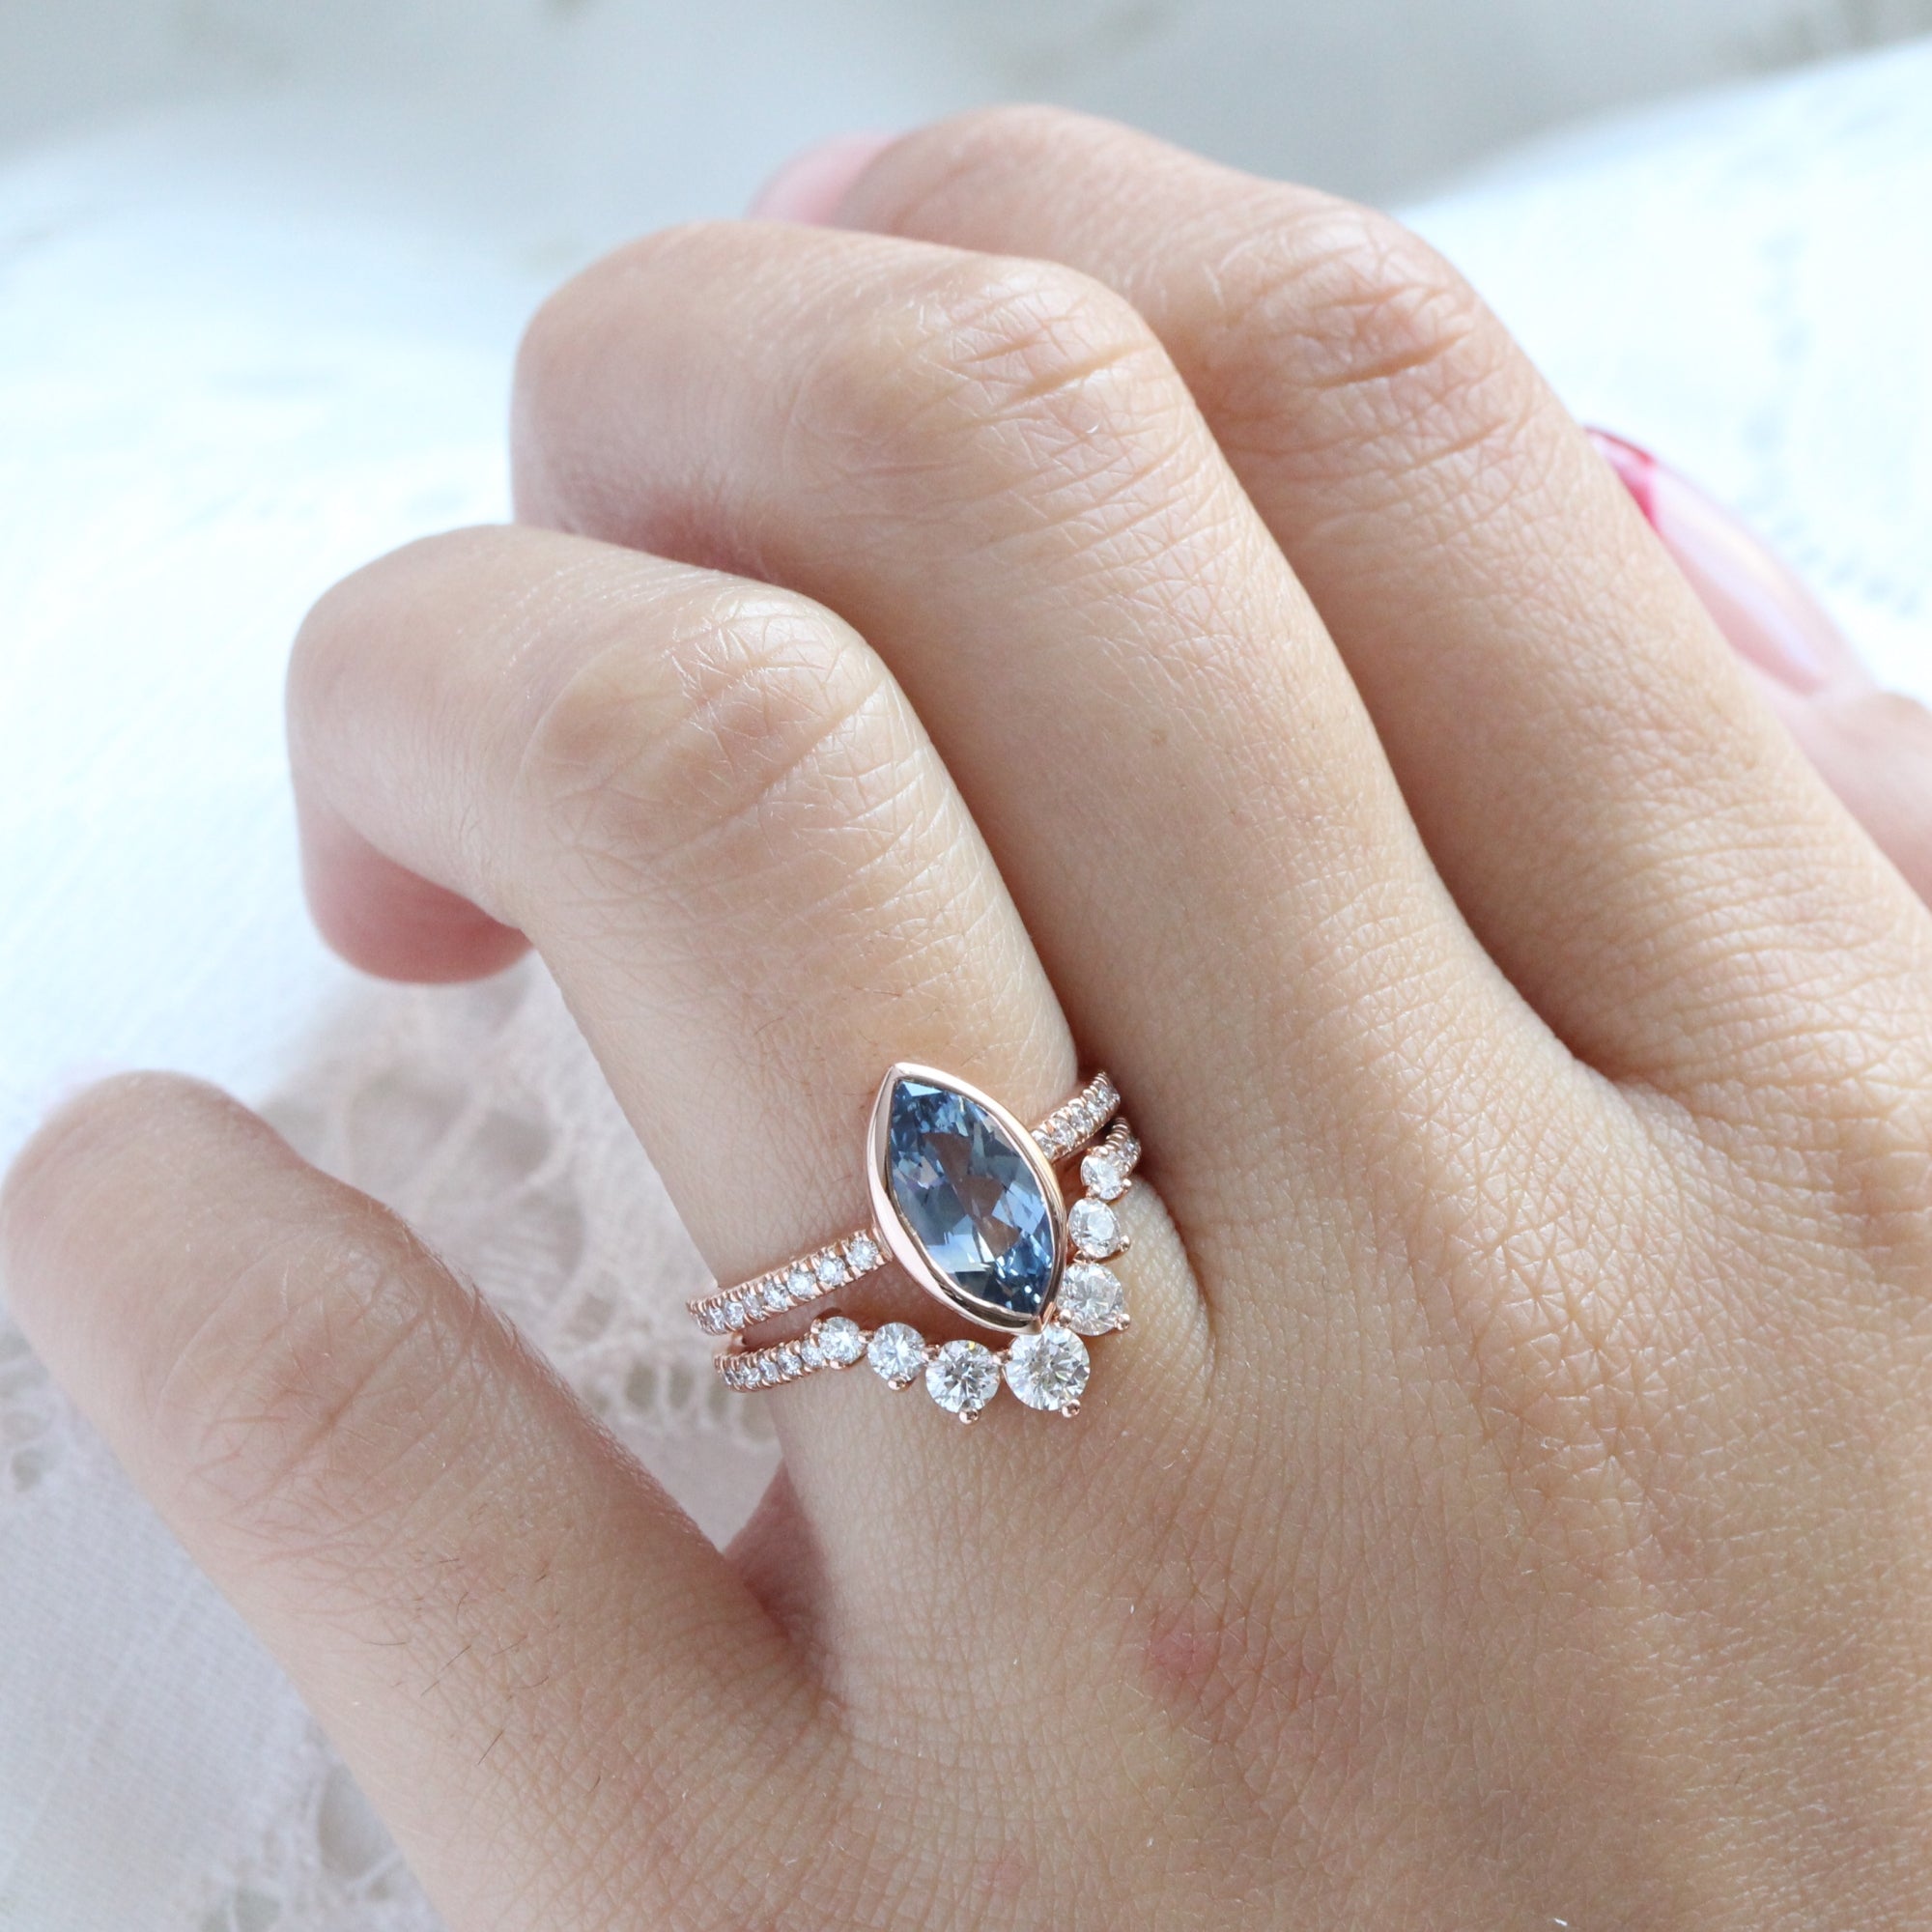 Marquise teal blue sapphire ring rose gold bezel solitaire pave diamond band la more design jewelry